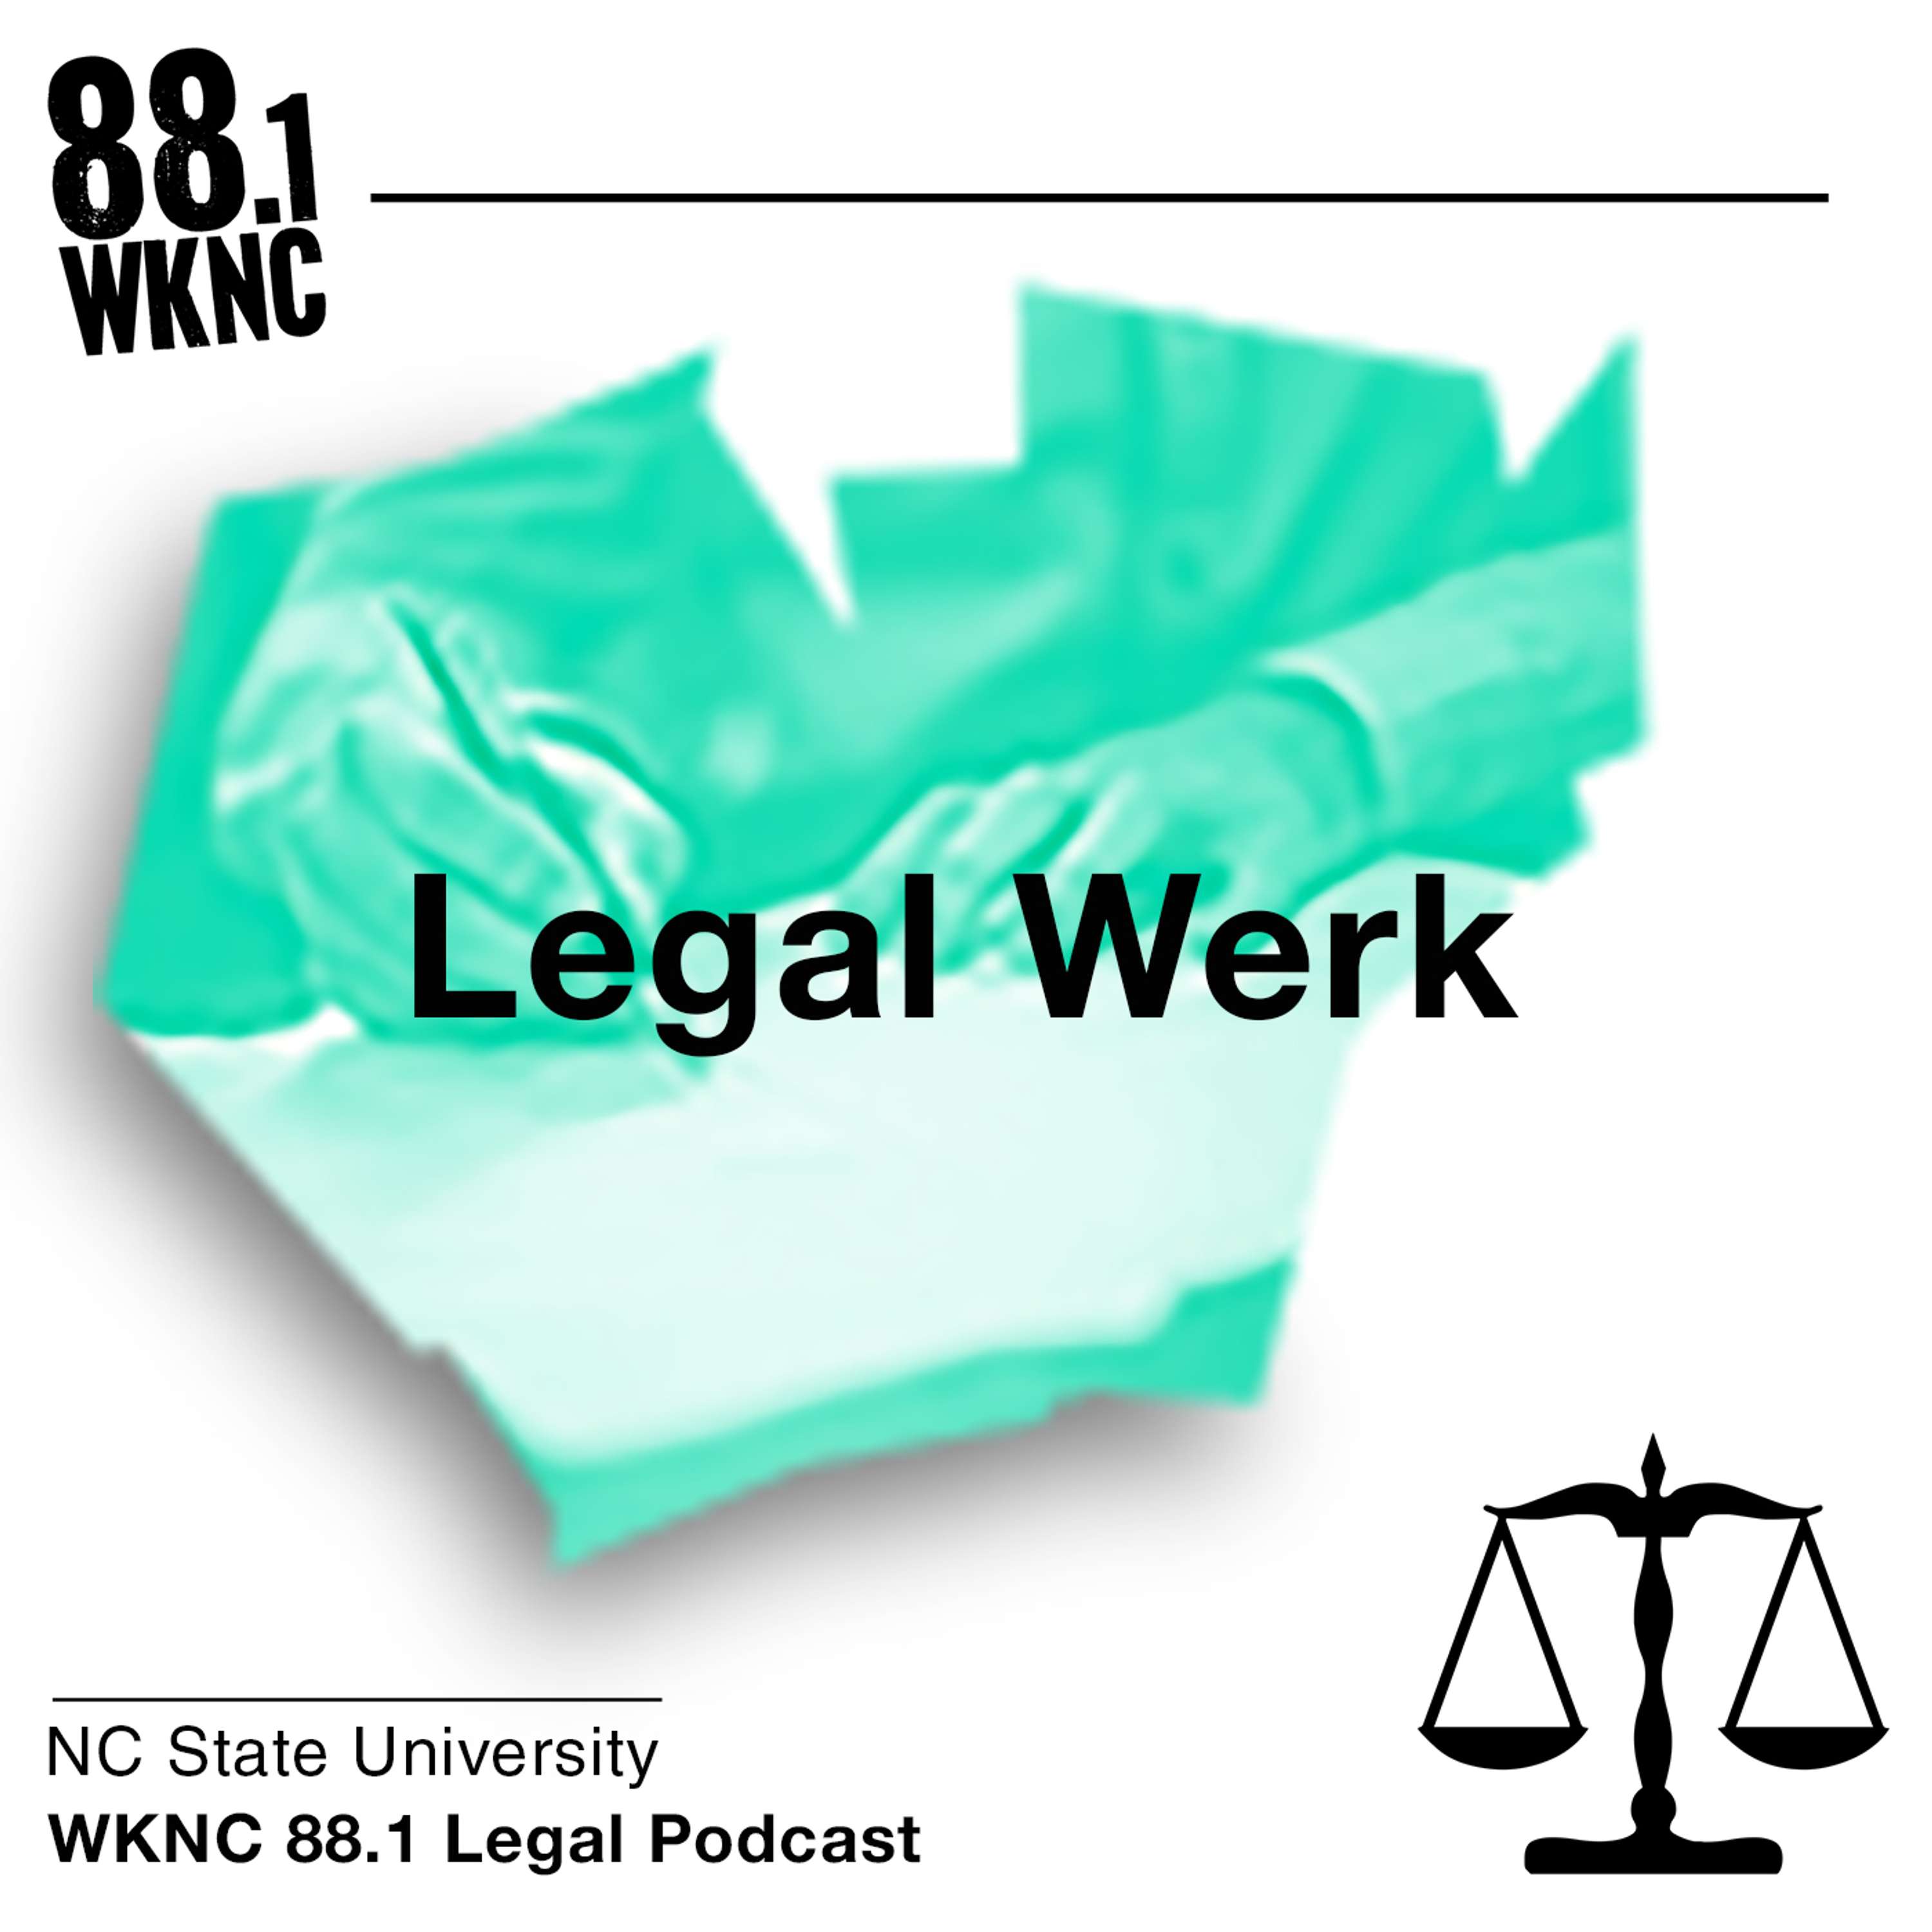 Legal Werk 1: Getting Stopped by the Police